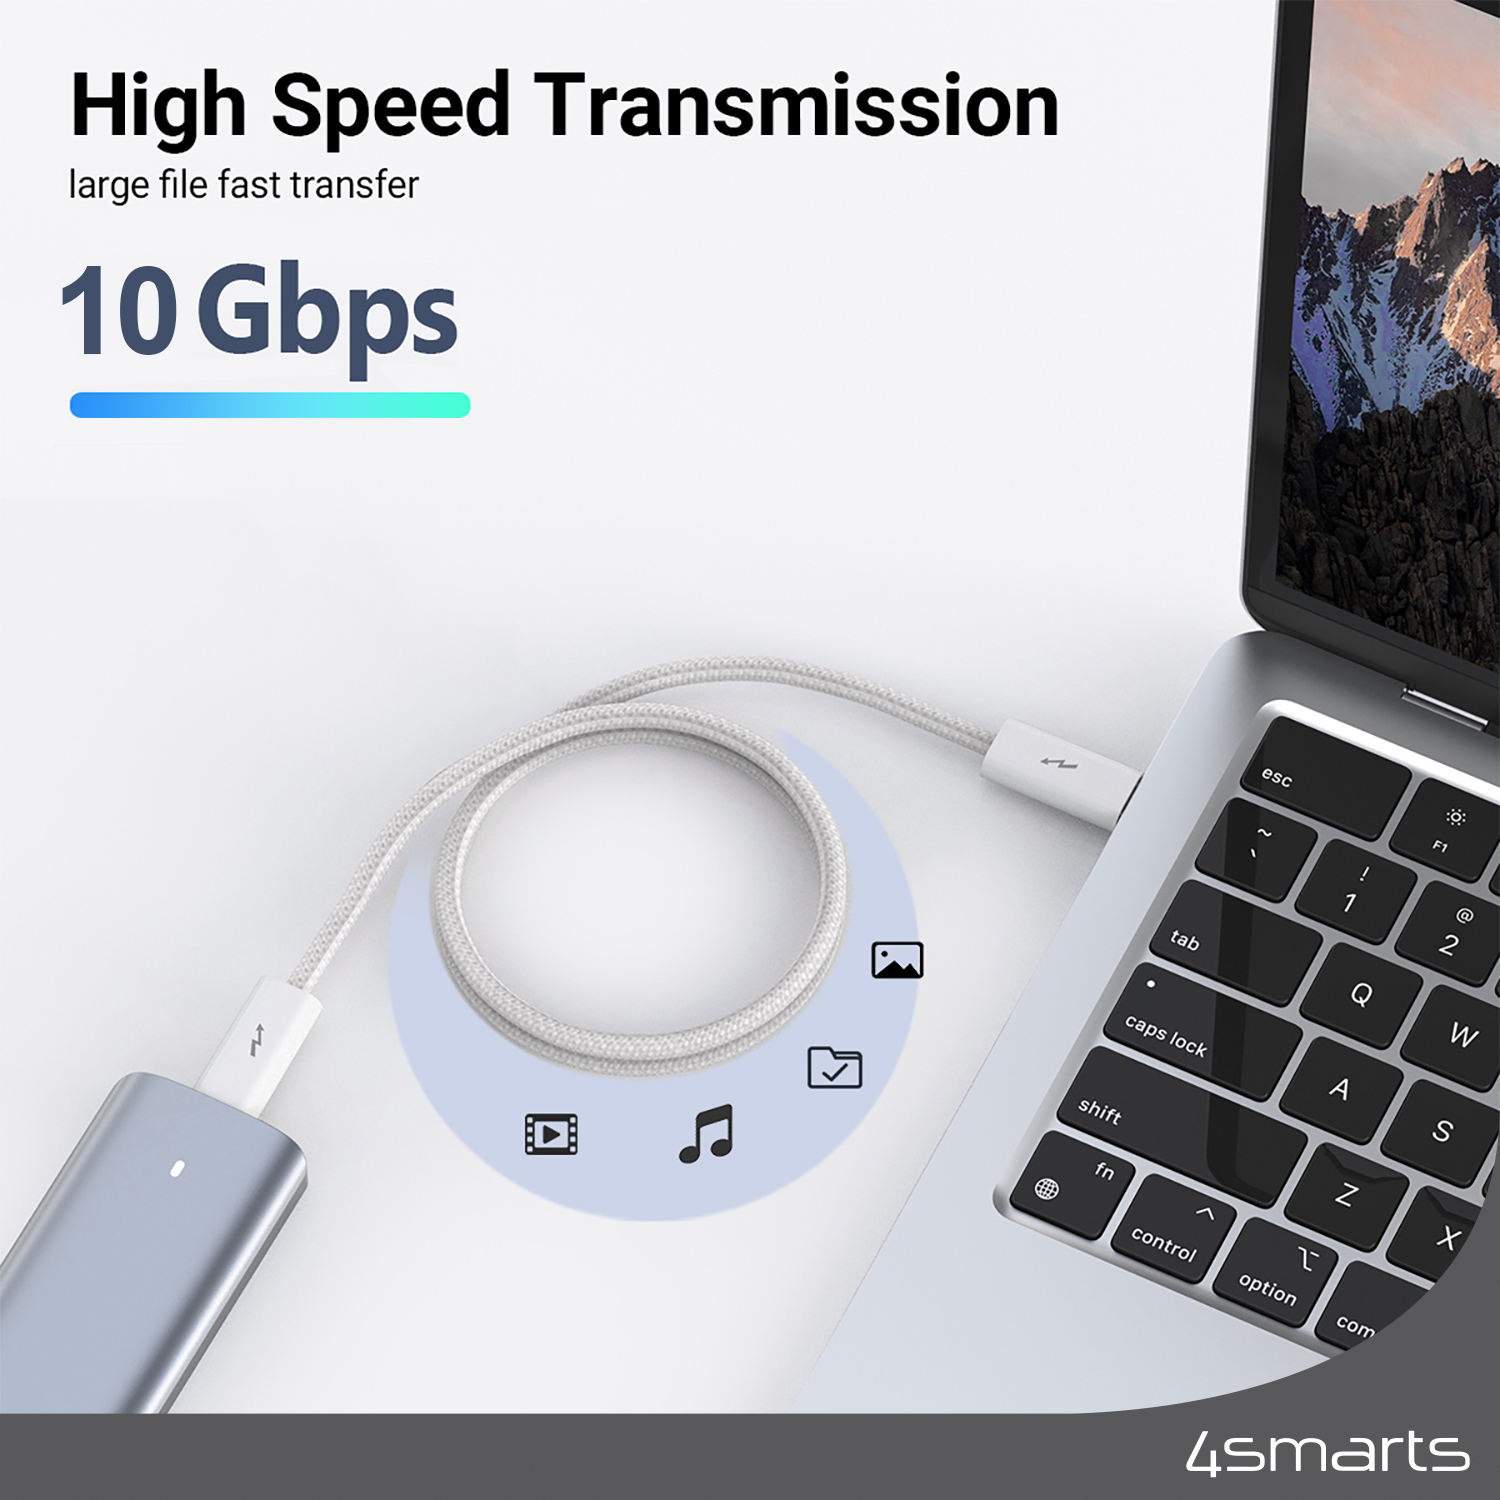 The PremiumCord USB-C cable from 4smarts supports high-speed data transfer.